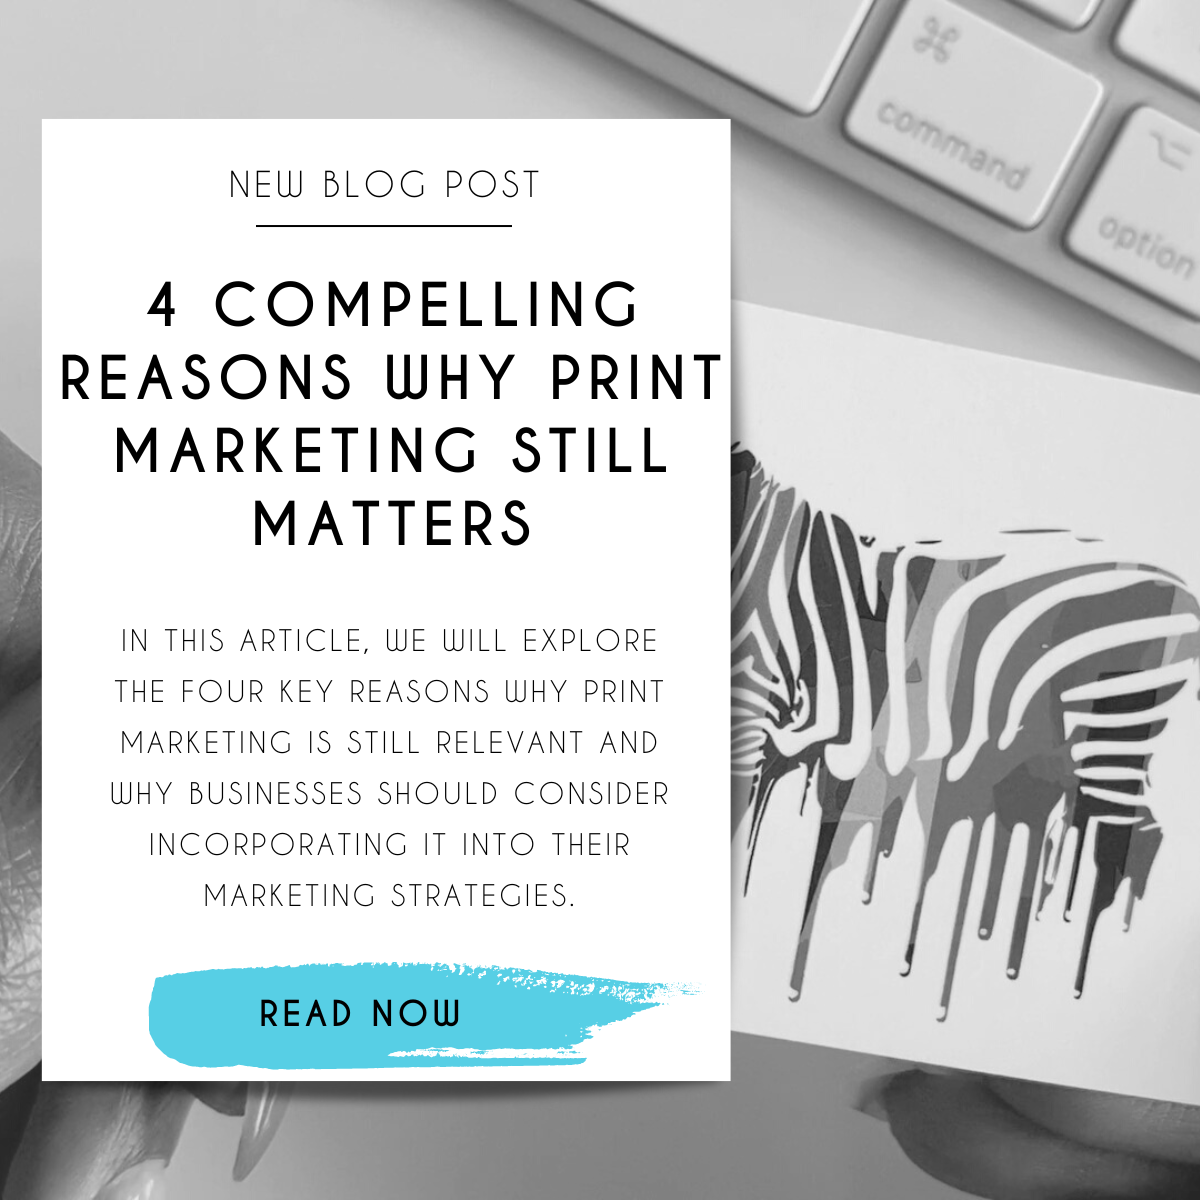 The Power of Print: 4 Compelling Reasons Why Print Marketing Still Matters